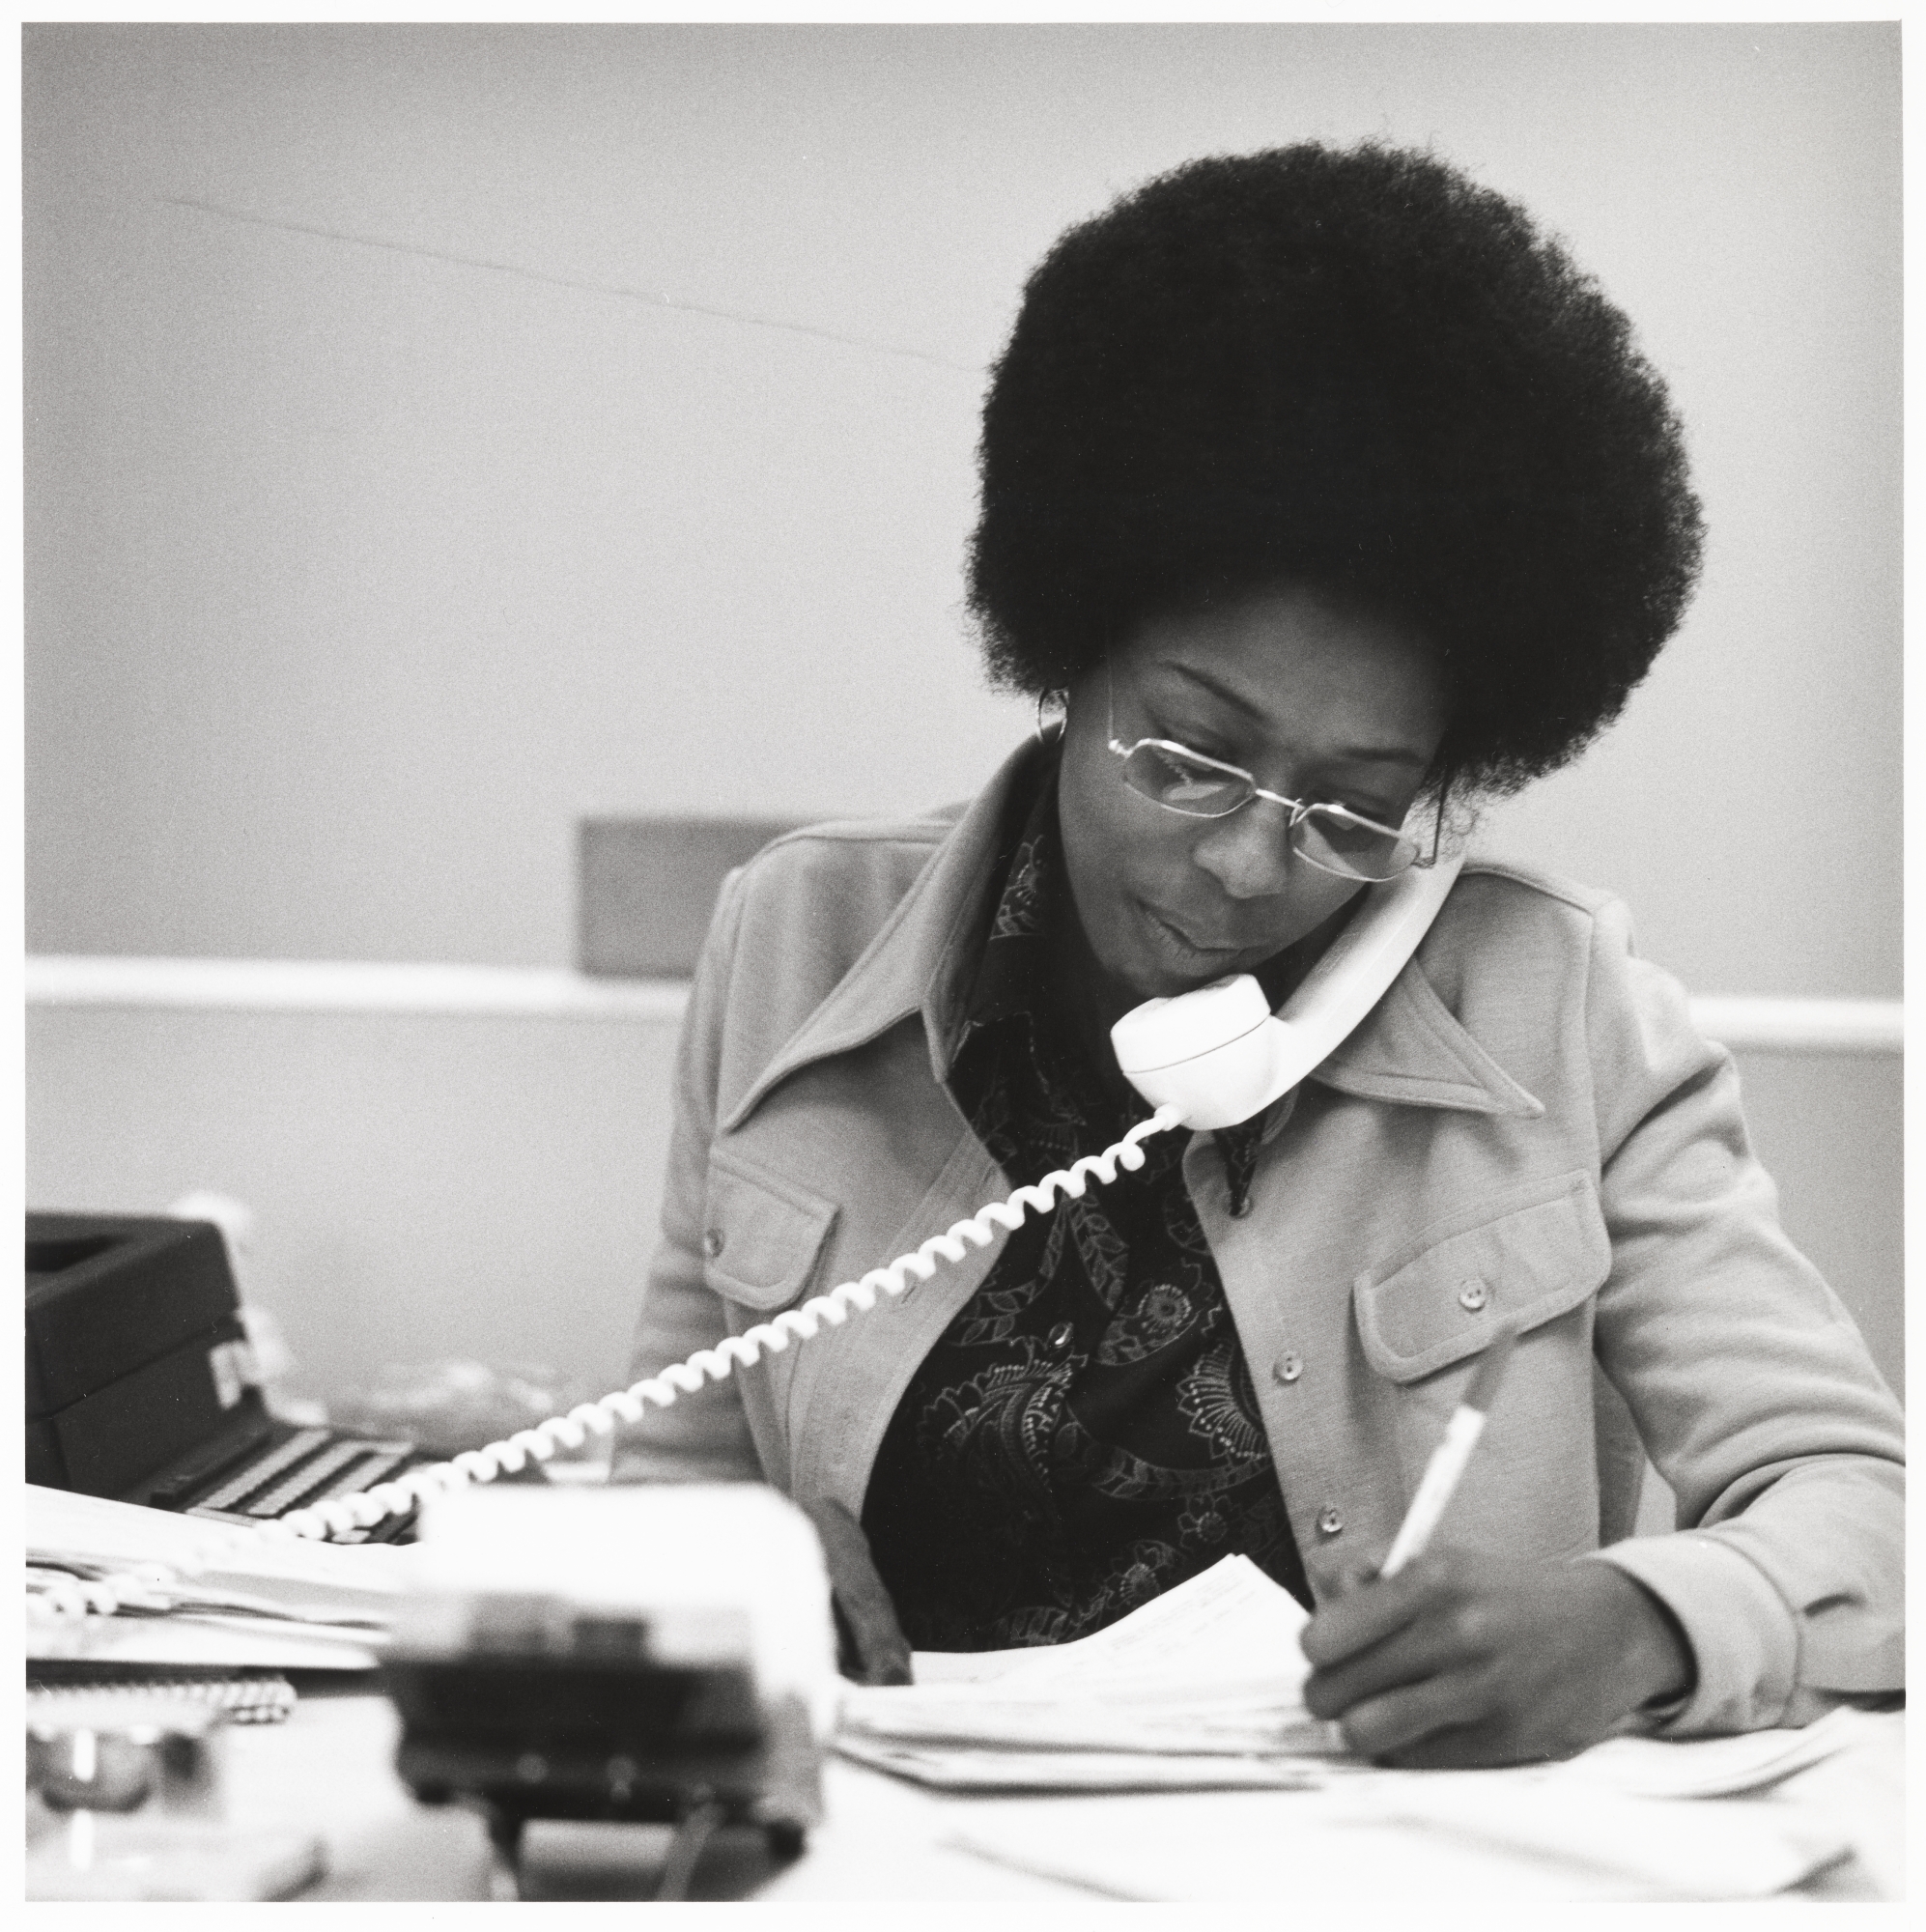 Employee of the New York branch of Banca Commerciale Italiana, 280 Park Avenue, March 1973